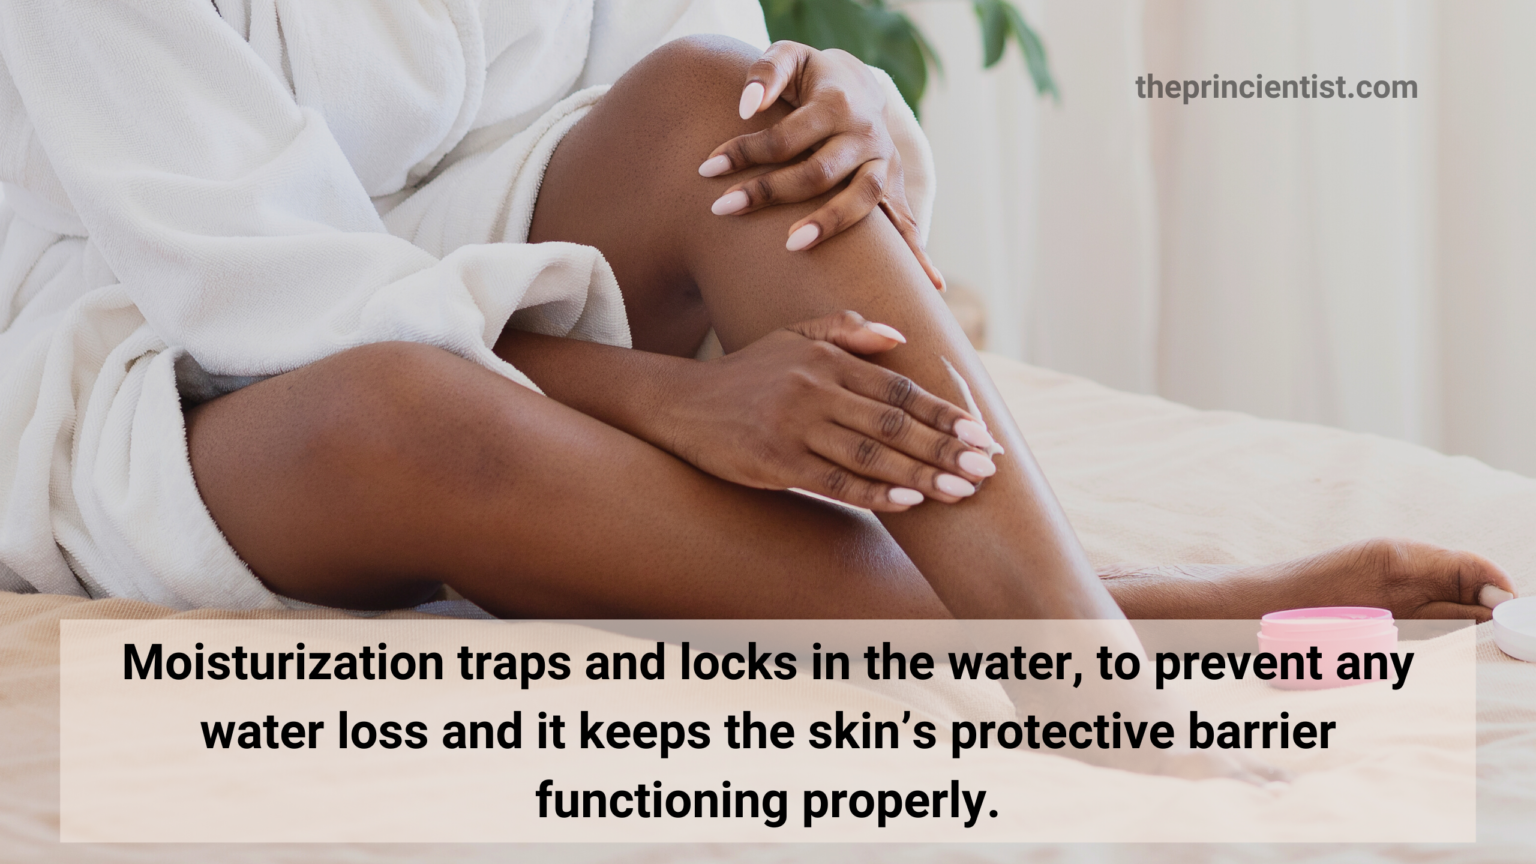 how to care for skin - moisturization benefits quote - black woman is applying lotion on her legs